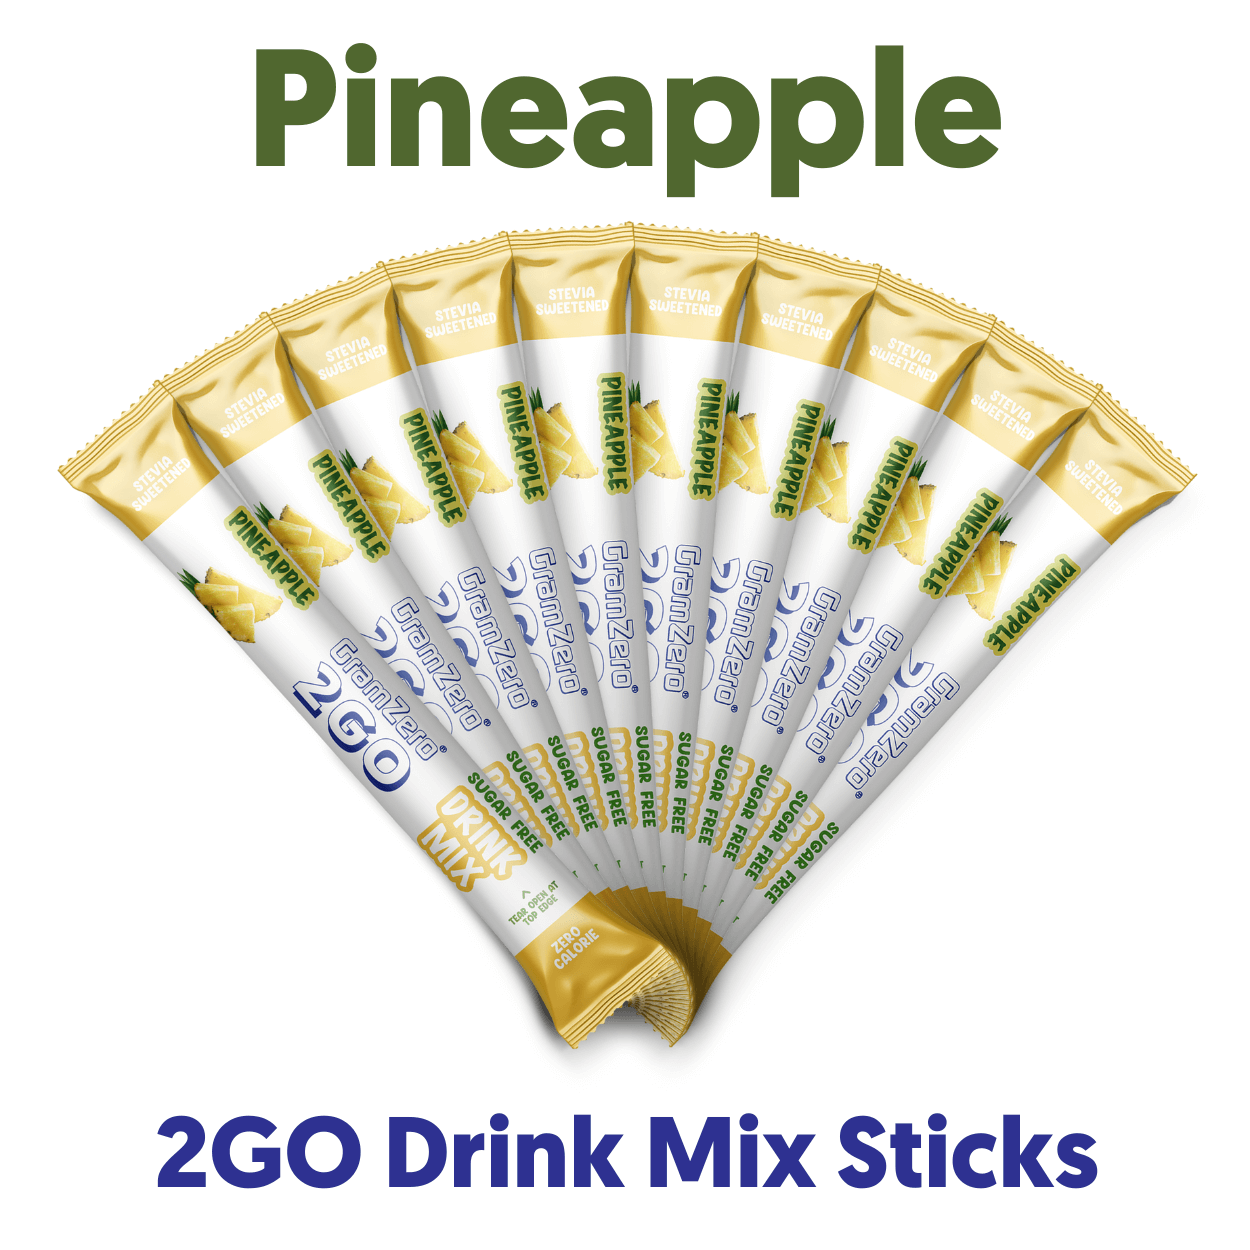 PINEAPPLE 2GO Sugar Free Drink Mix Sticks: 10 Pack ~ Great for Loaded Tea Kits